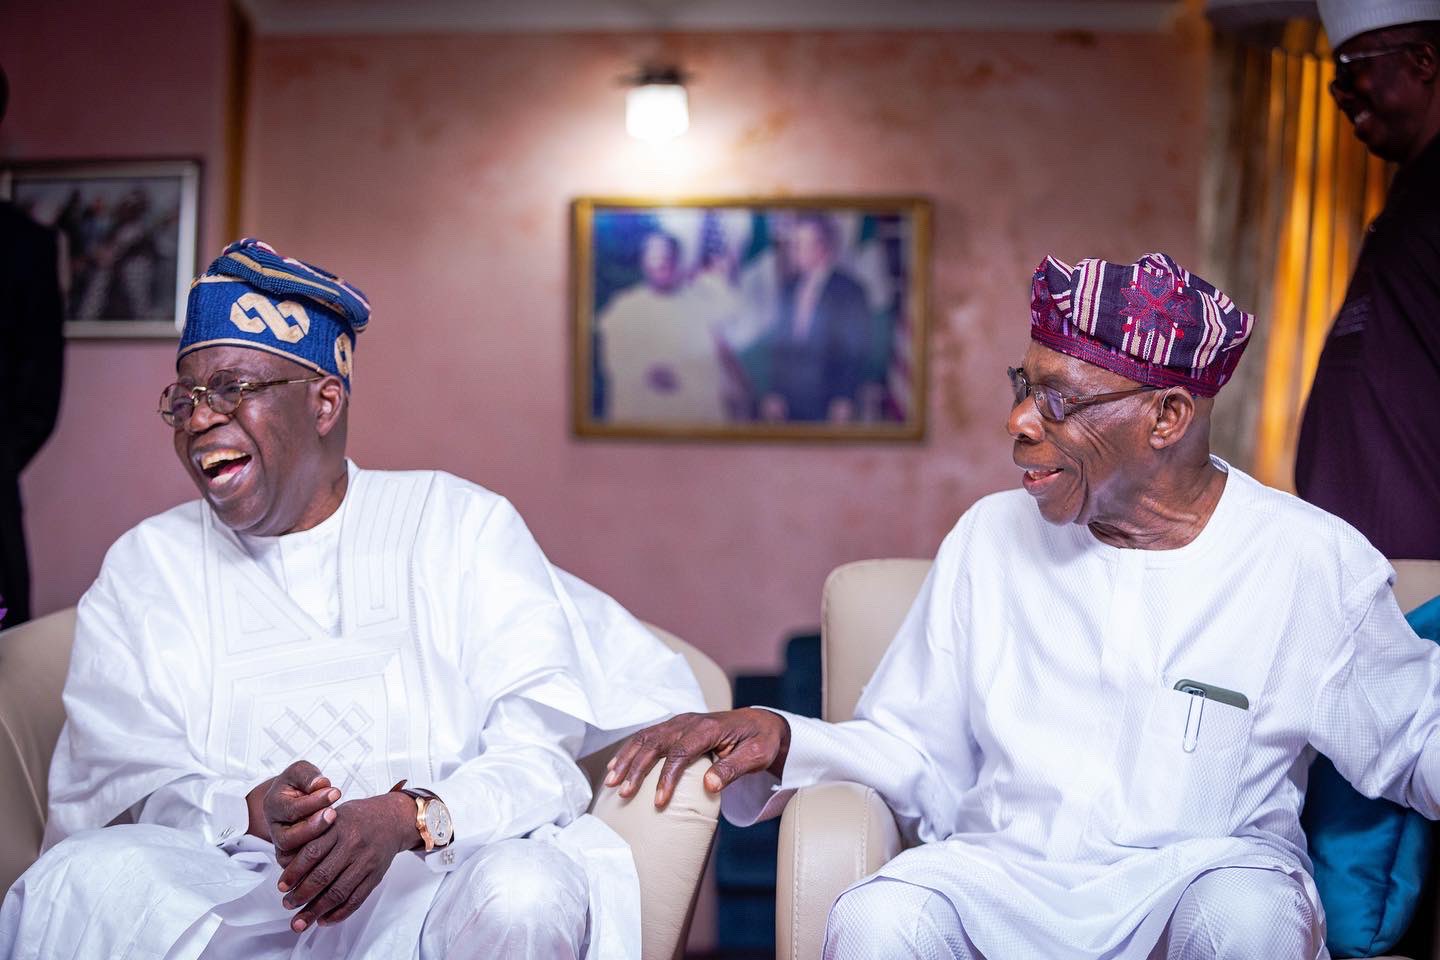 The presidential candidate of the All Progressives Congress (APC), Bola Tinubu, on Wednesday held a closed-door meeting with former president Olusegun Obasanjo at the latter’s penthouse residence within the Olusegun Obasanjo Presidential Library in Abeokuta, Ogun State.